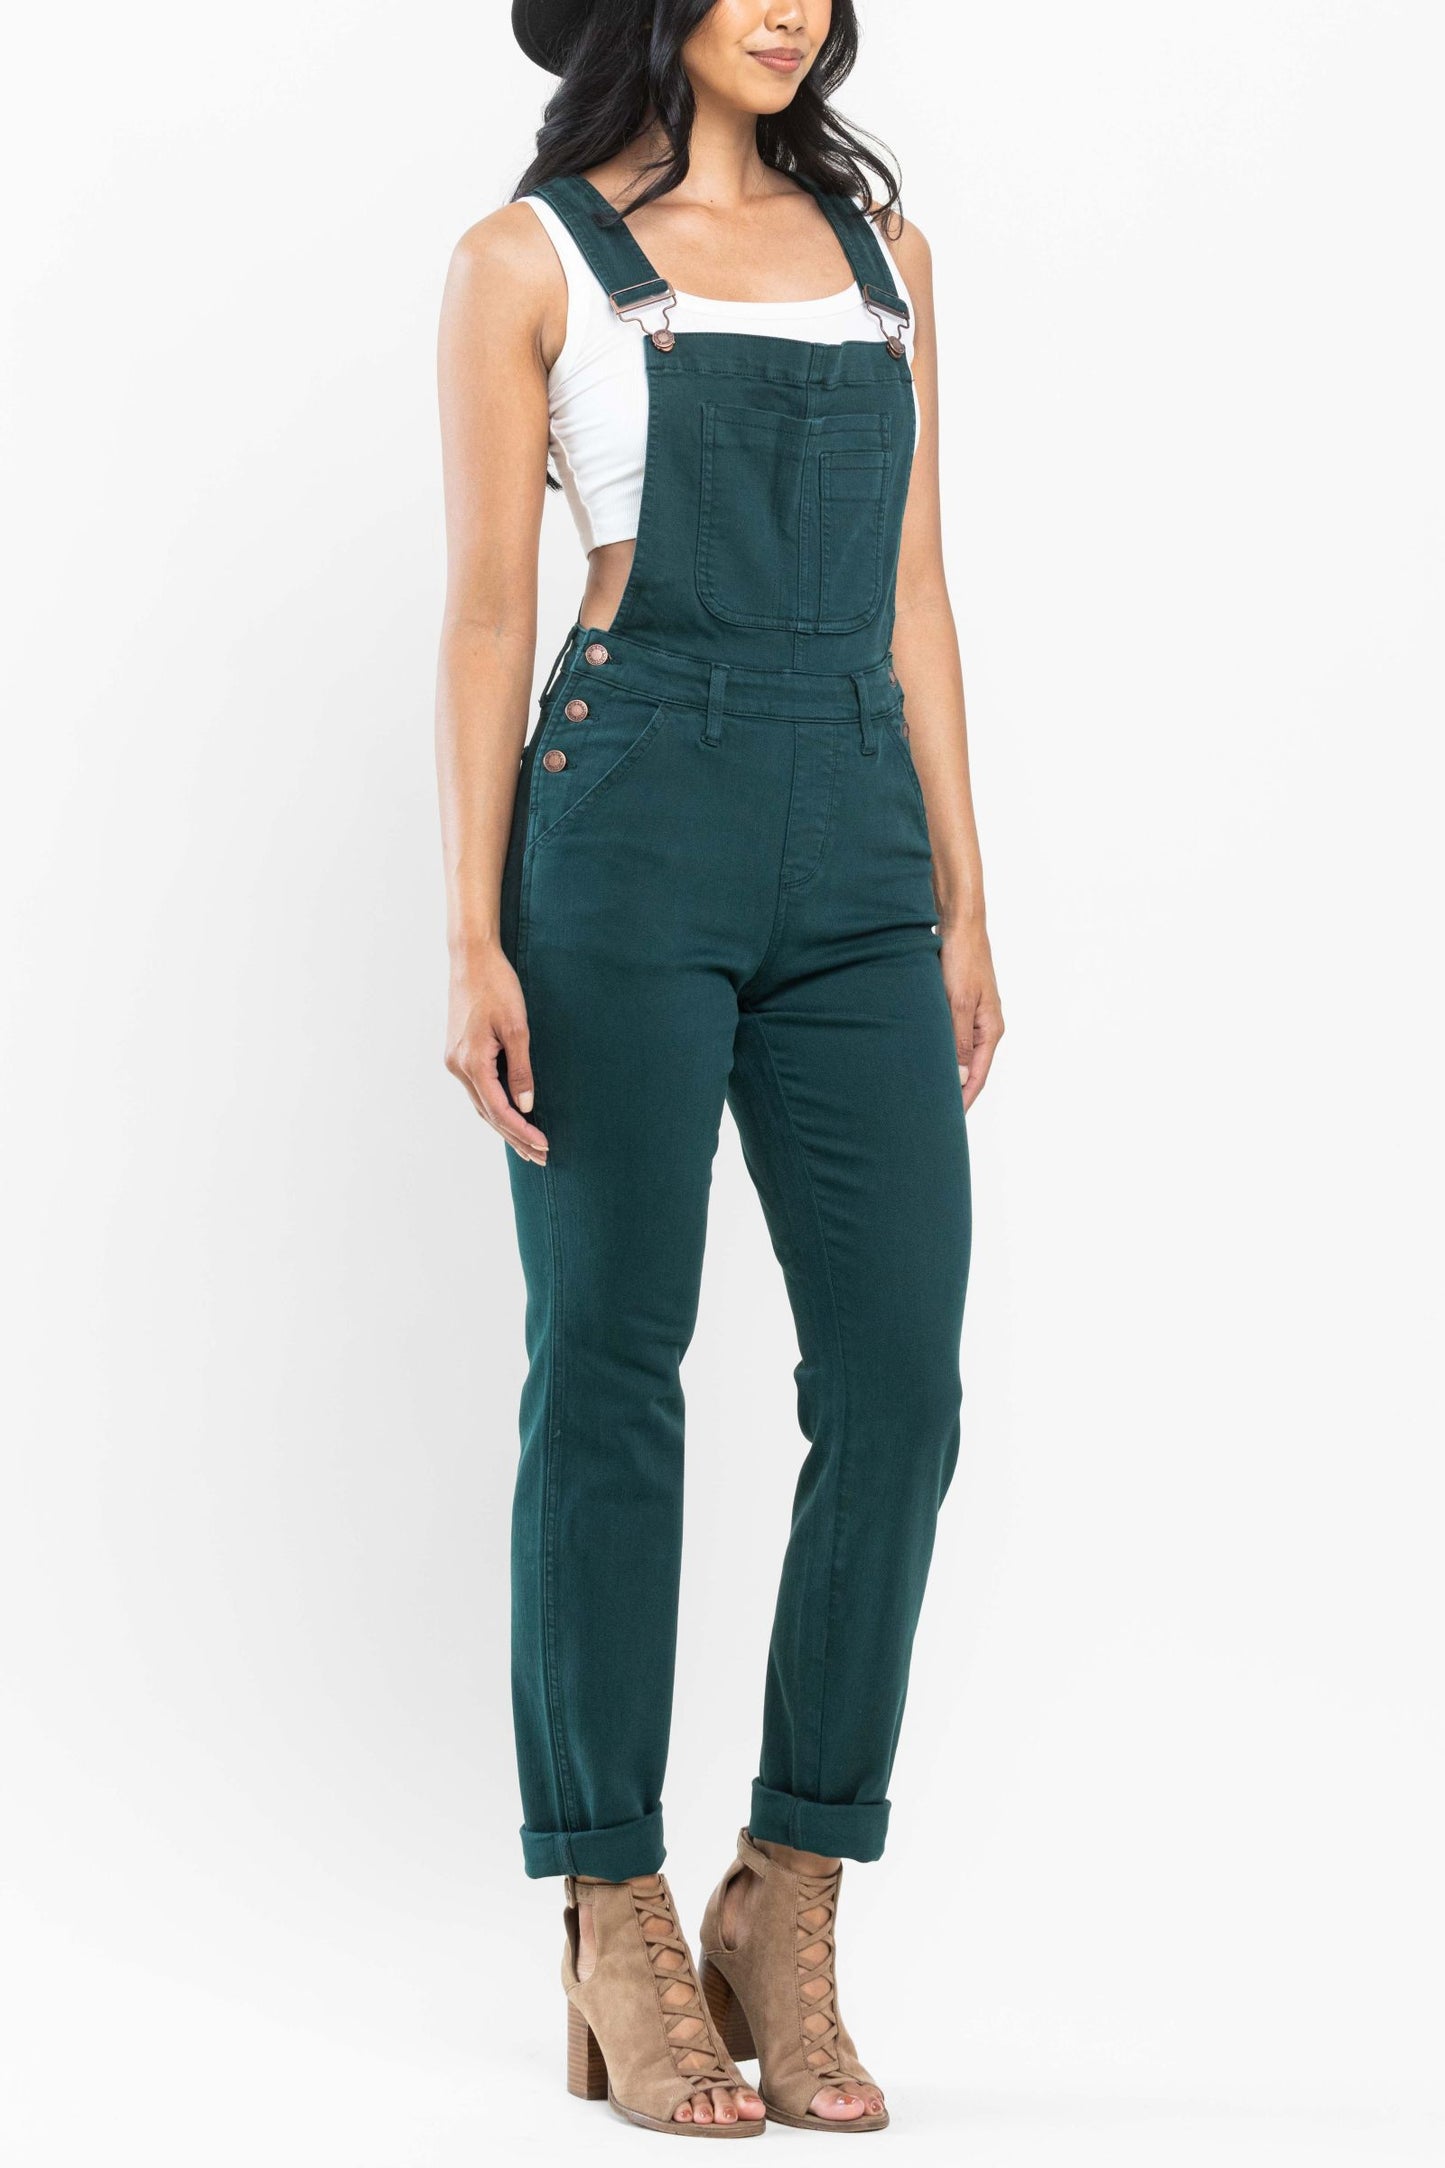 Teal Overalls